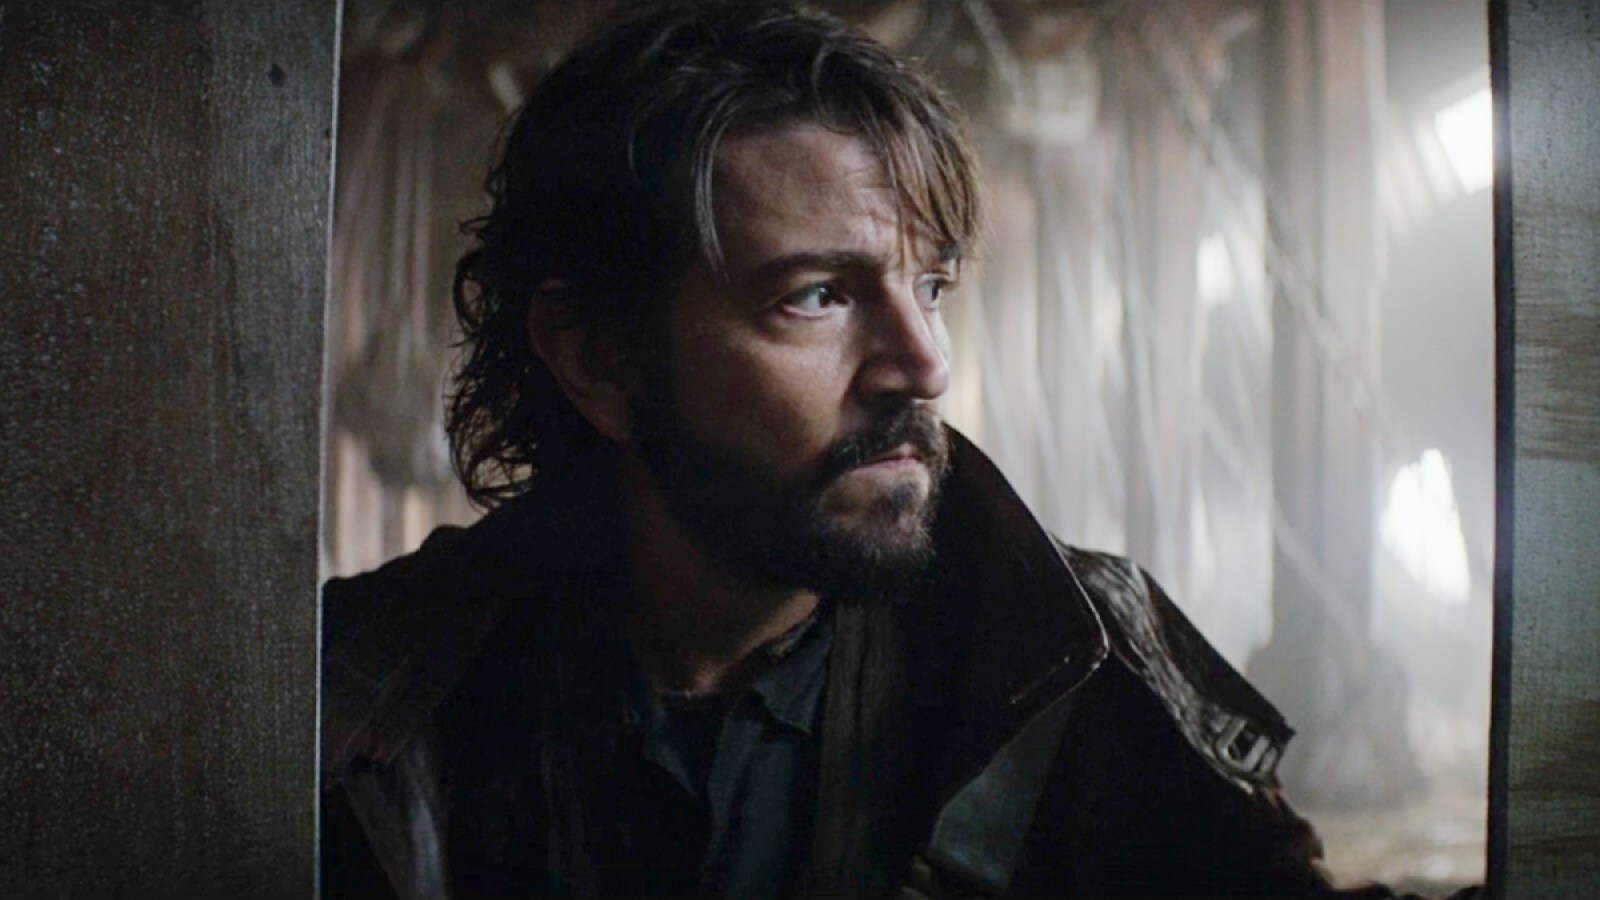 Diego Luna as Cassian Andor in the prequel series Star Wars: Rogue One Andor